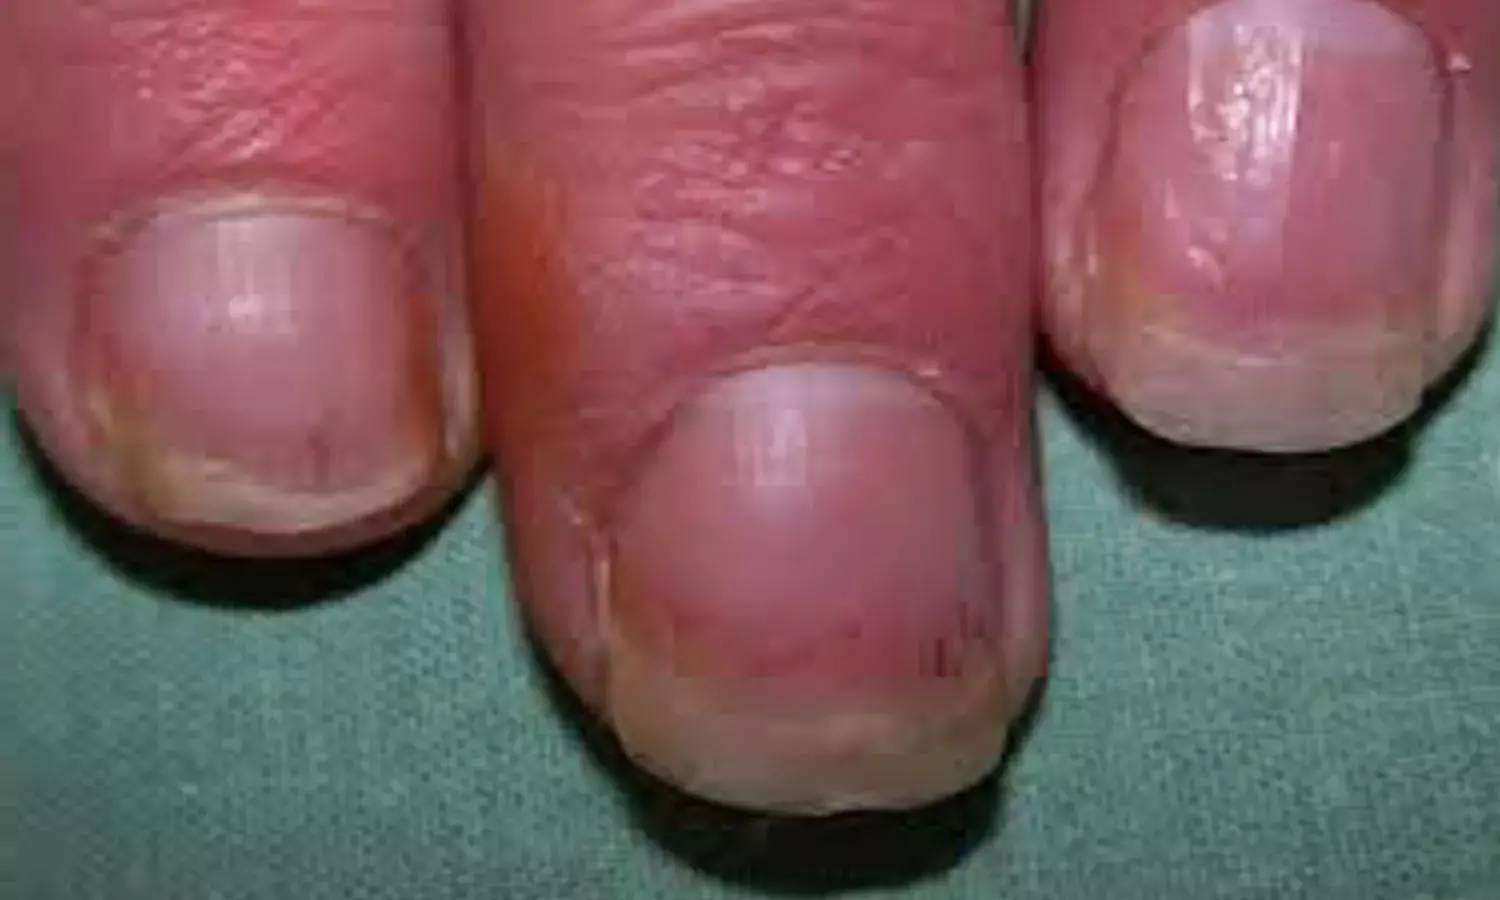 How Does Psoriatic Arthritis Affect Nails?